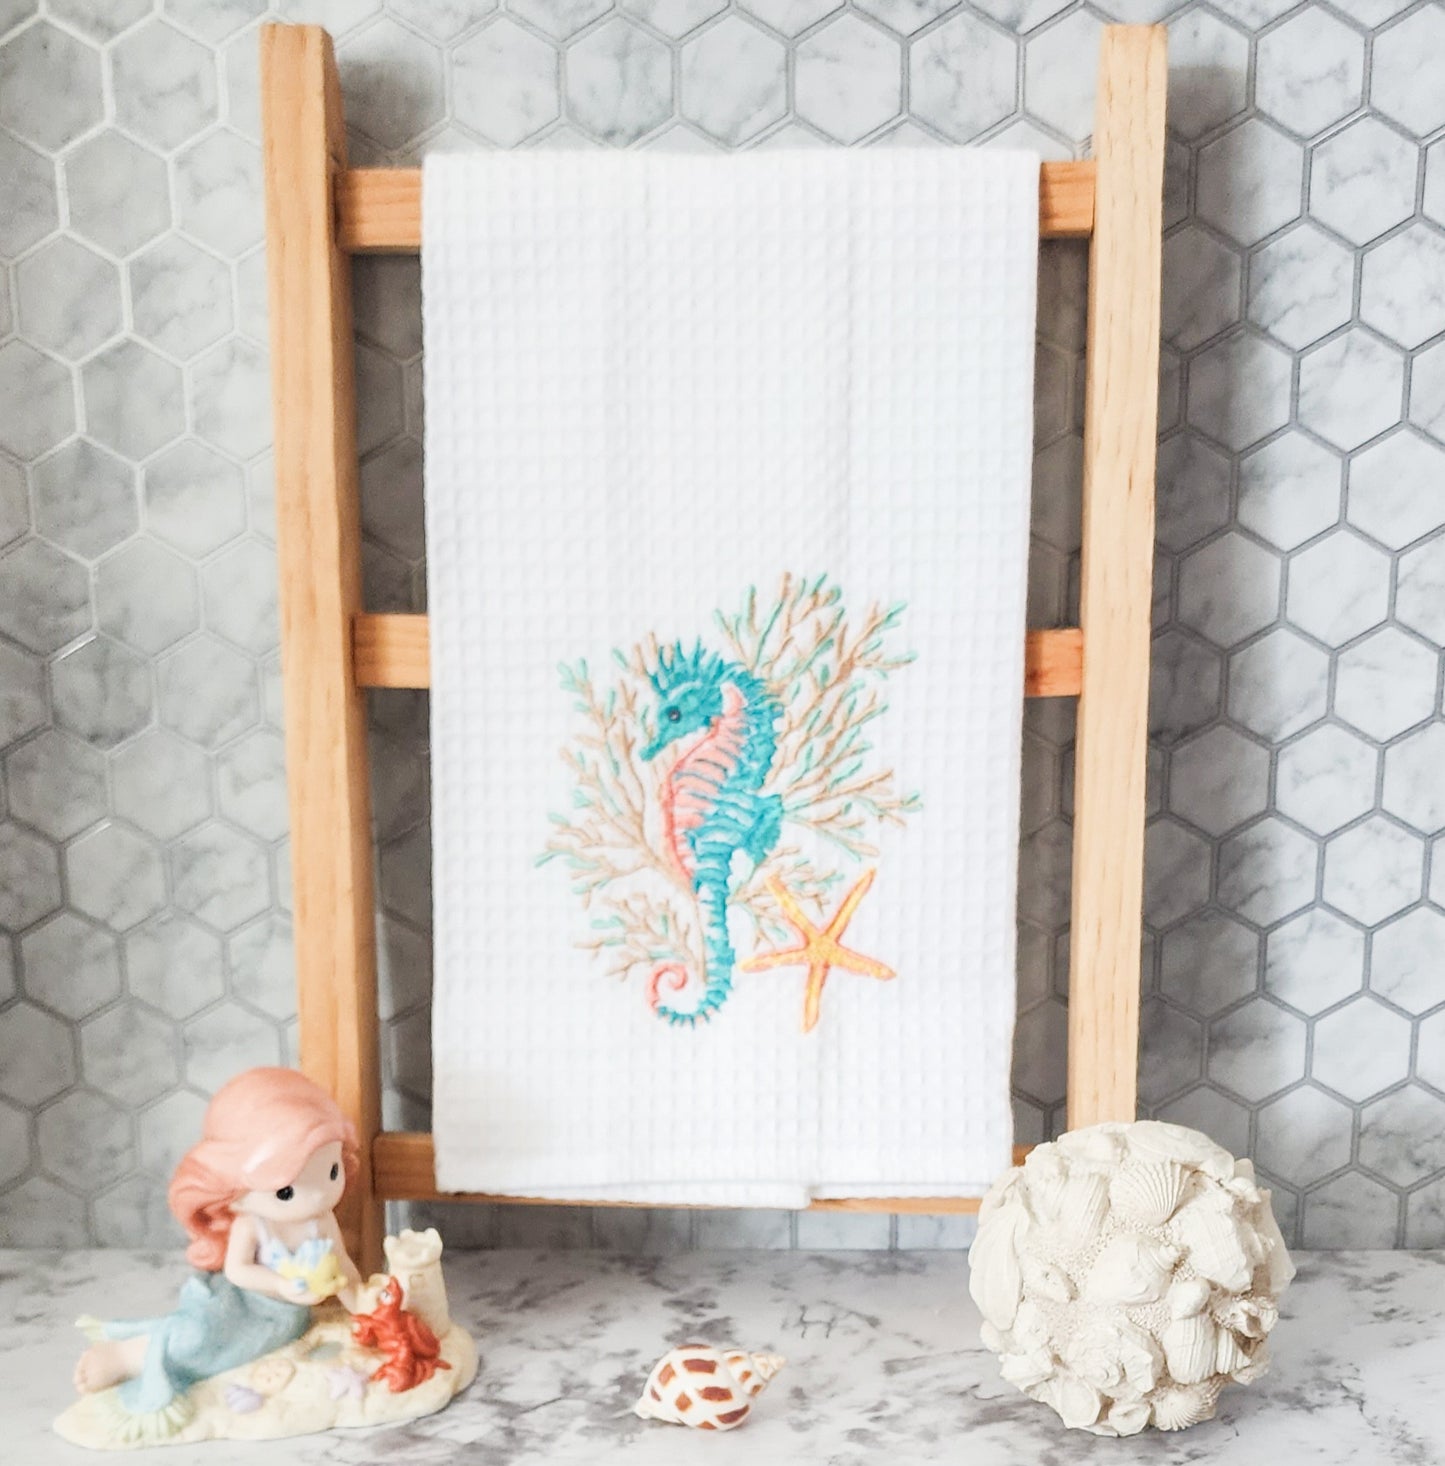 Seahorse And Coral Coastal - Waffle Weave Embroidered Kitchen Towel